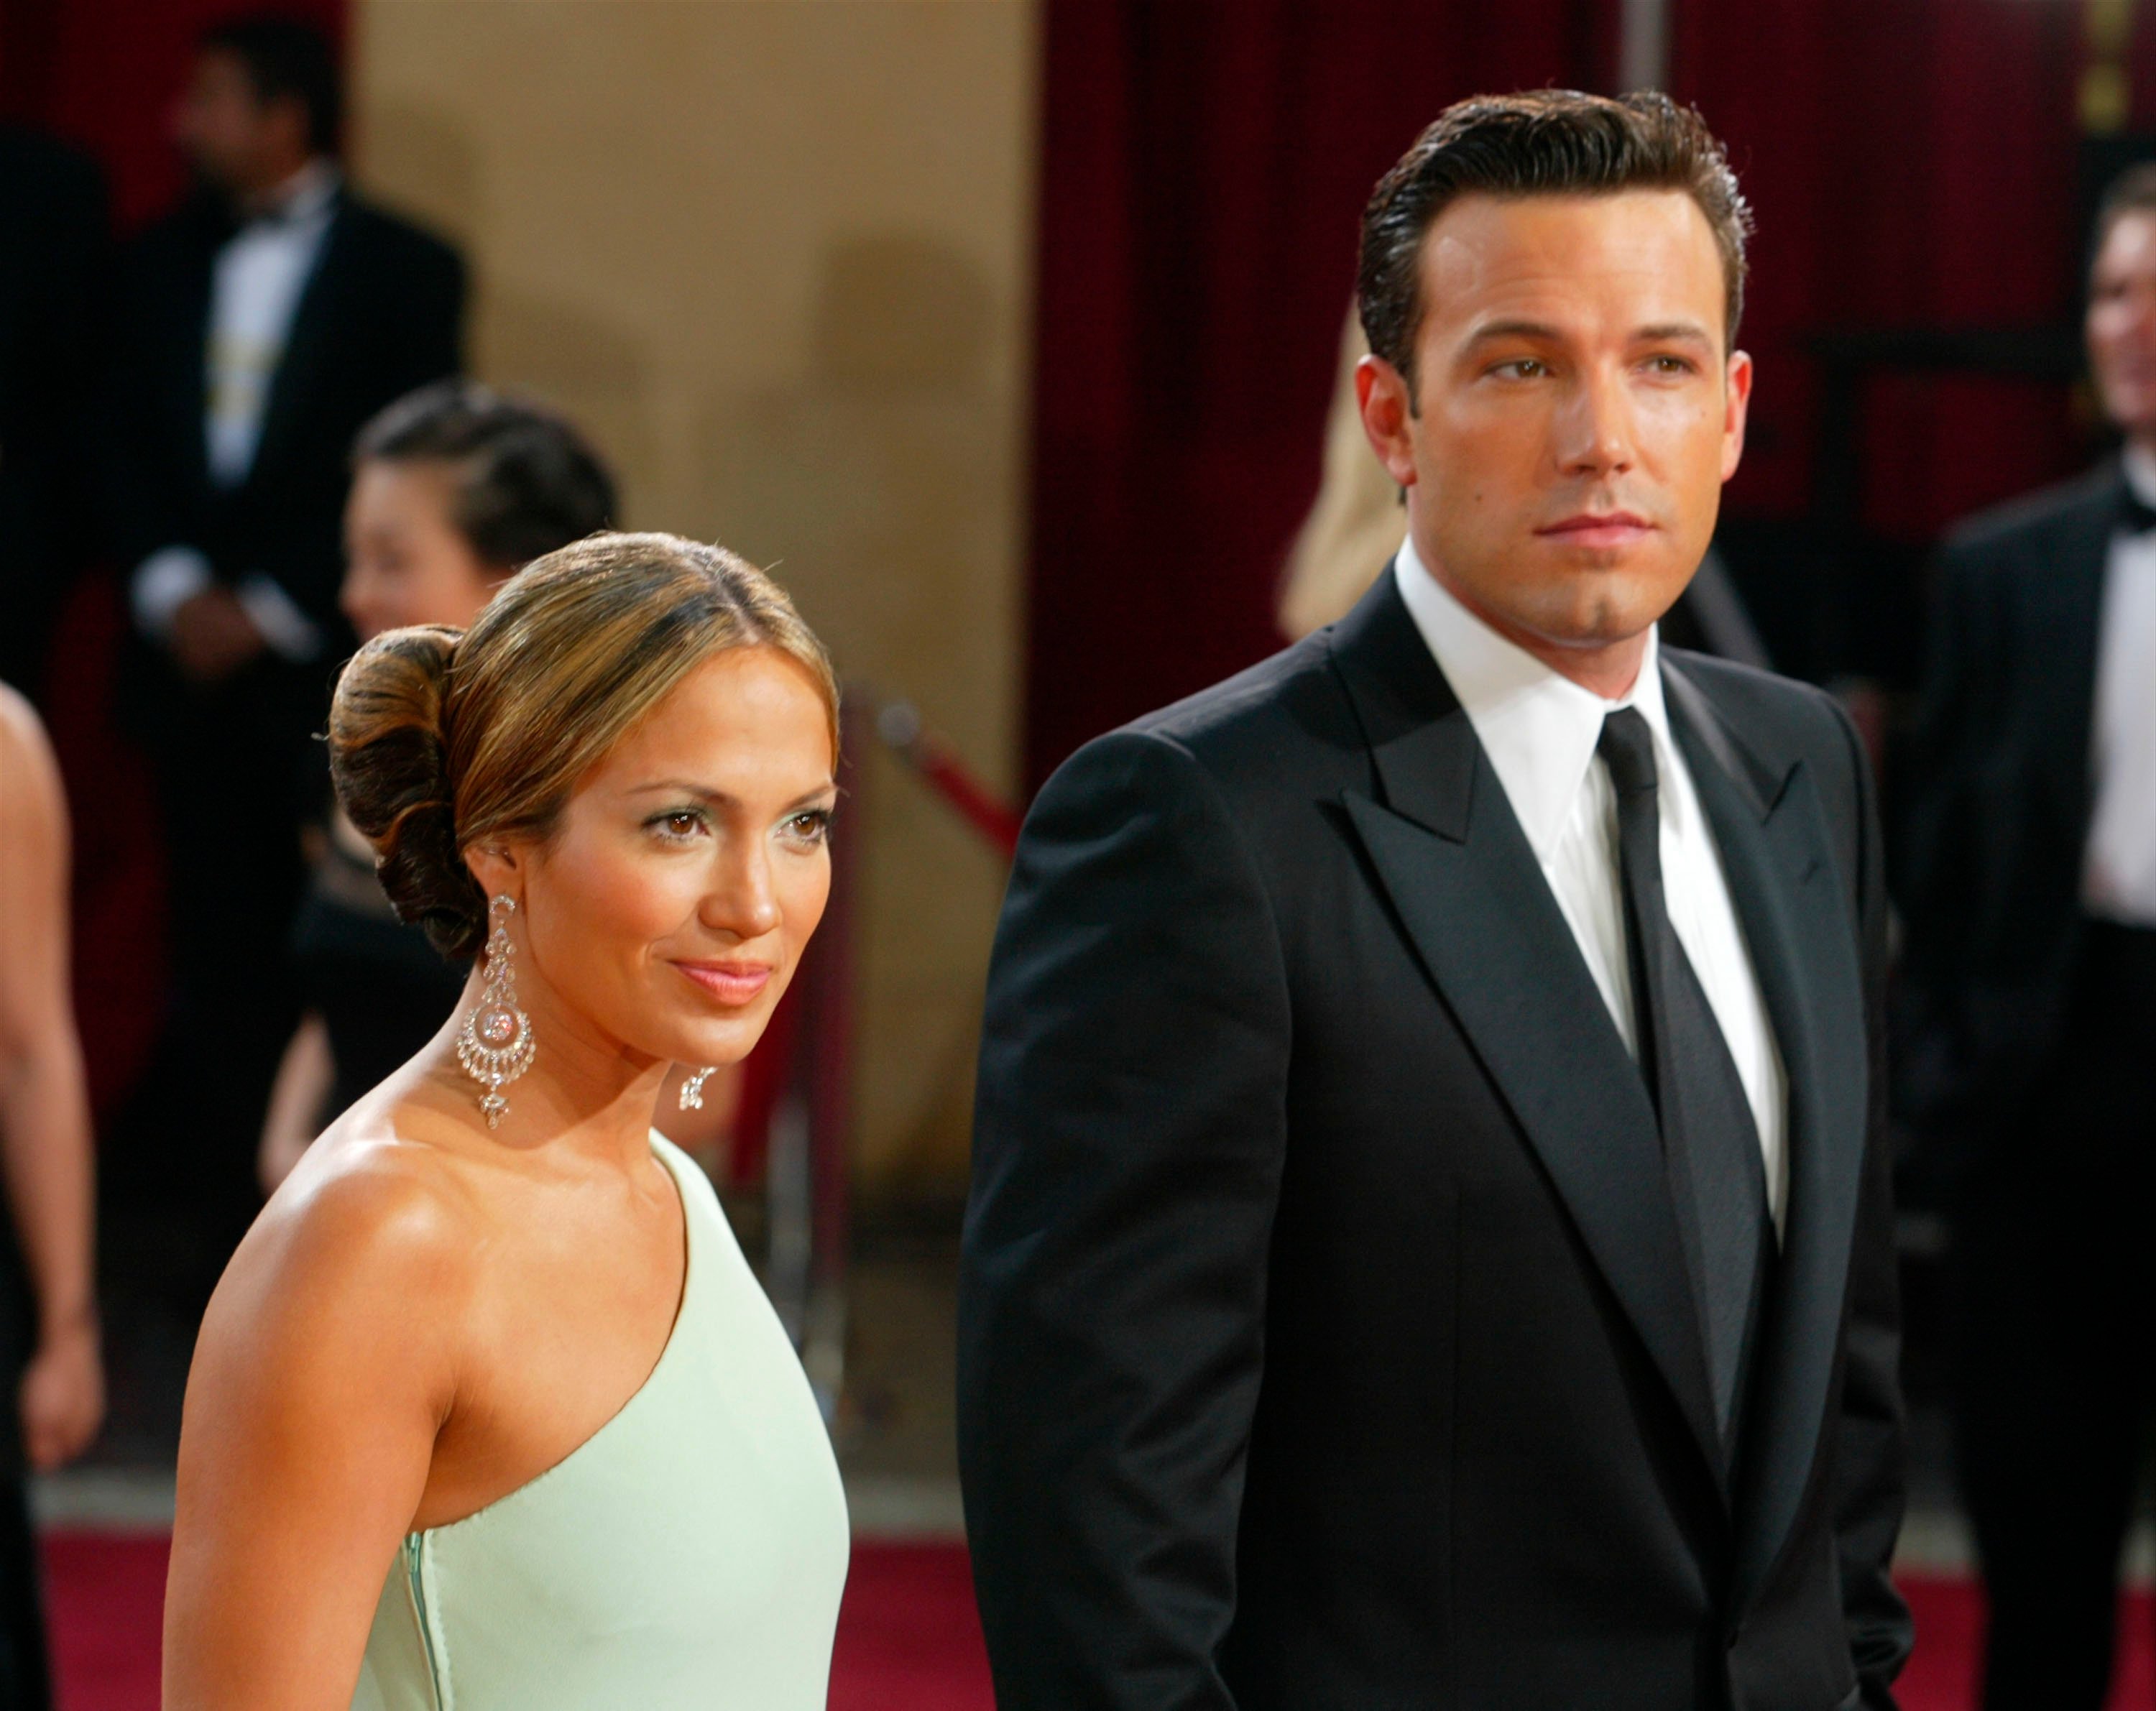 Jennifer Lopez and Ben Affleck, who had their wedding ceremony in Georgia